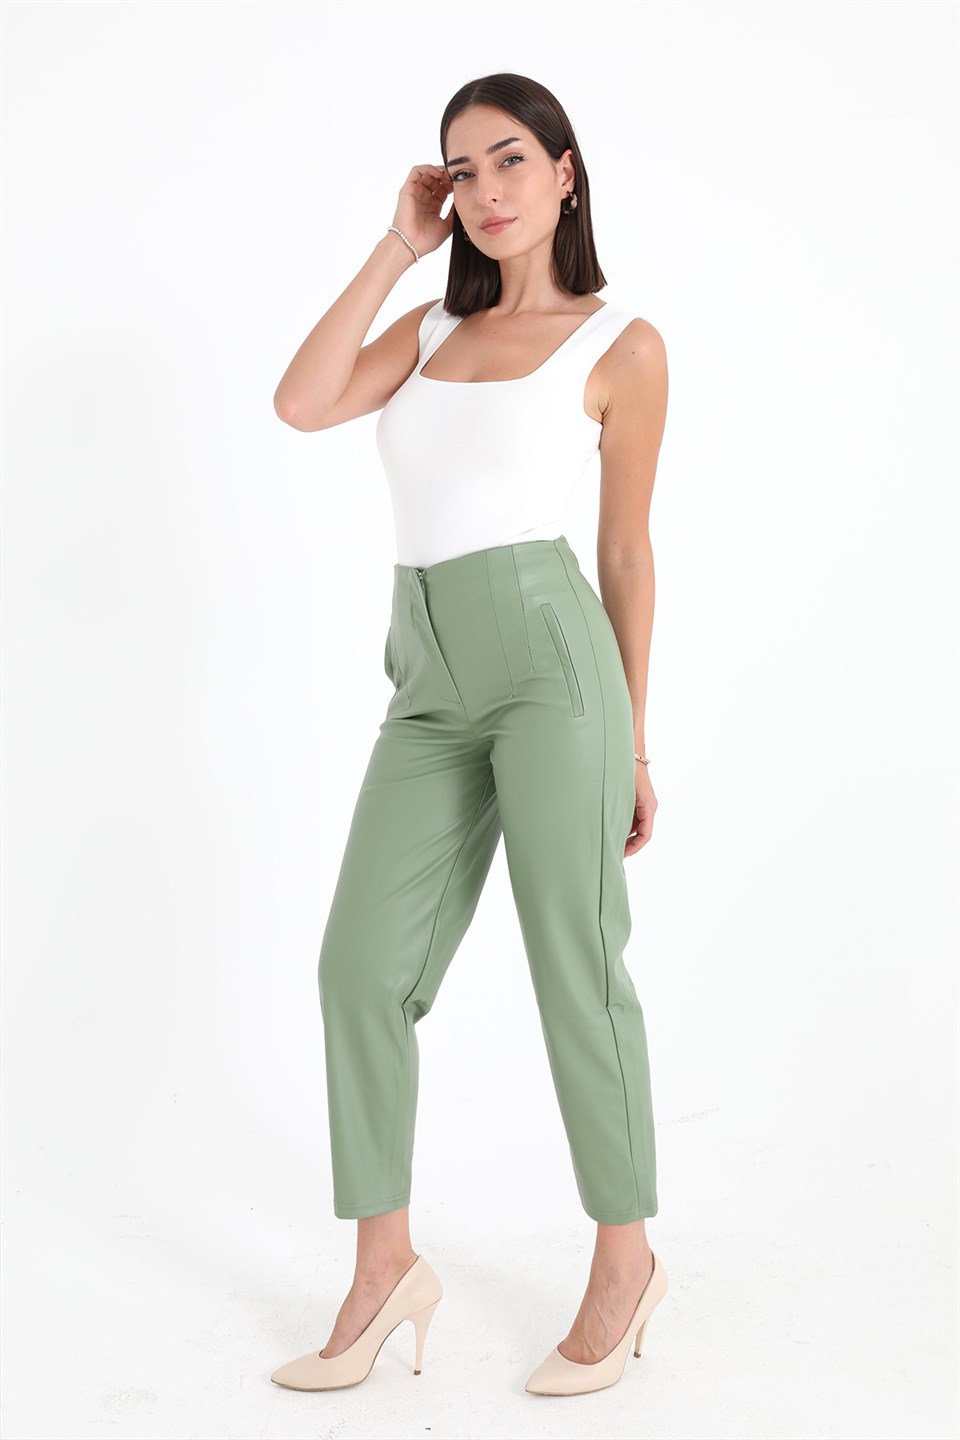 Women's Pleated High Waist Leather Trousers - Mint Green - STREETMODE™